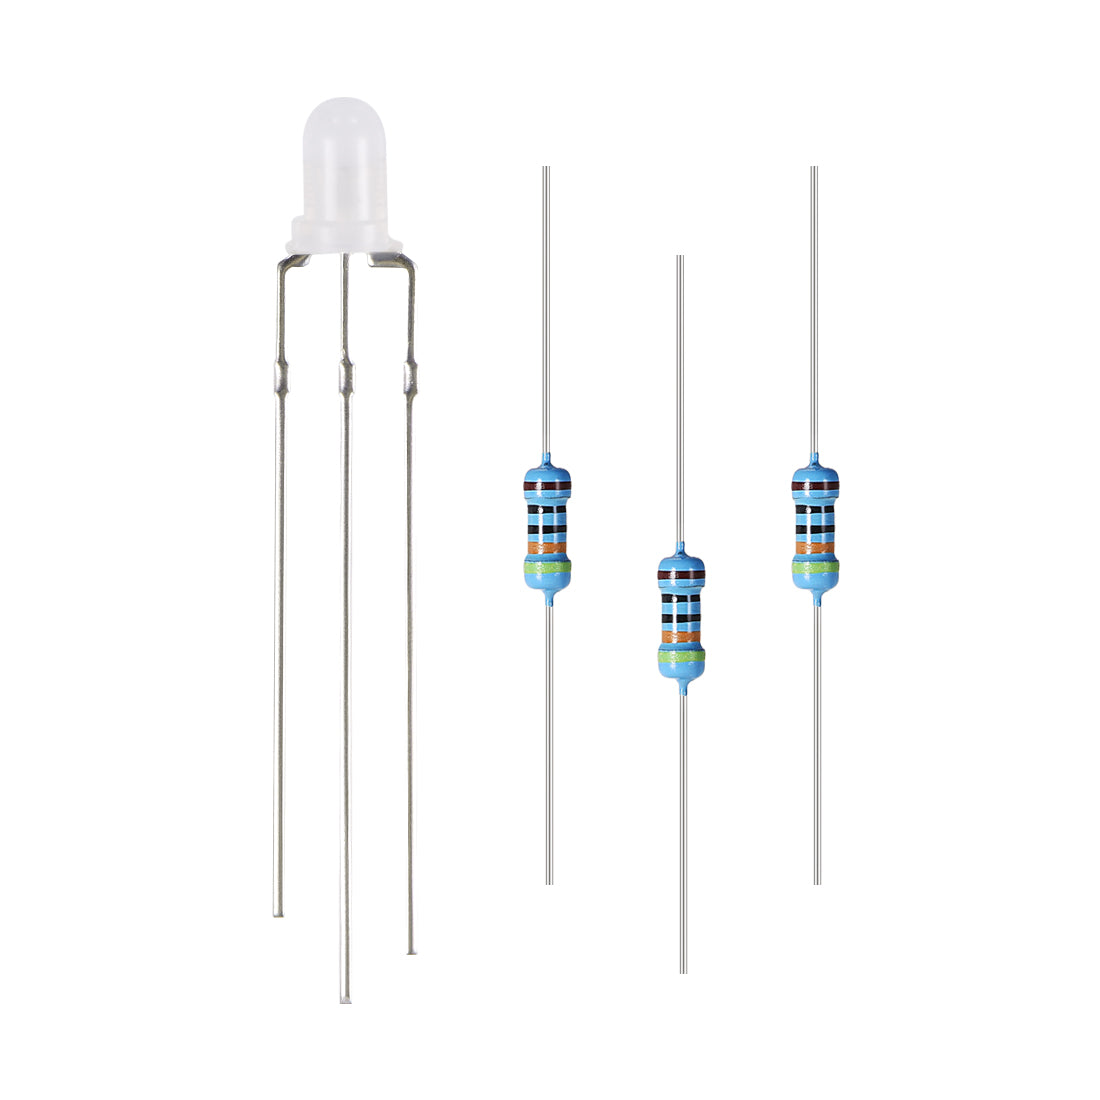 uxcell Uxcell 50Set 3mm LED Diodes Kit, Diffused Bi-Color (Red & Emerald Green), Common Anode